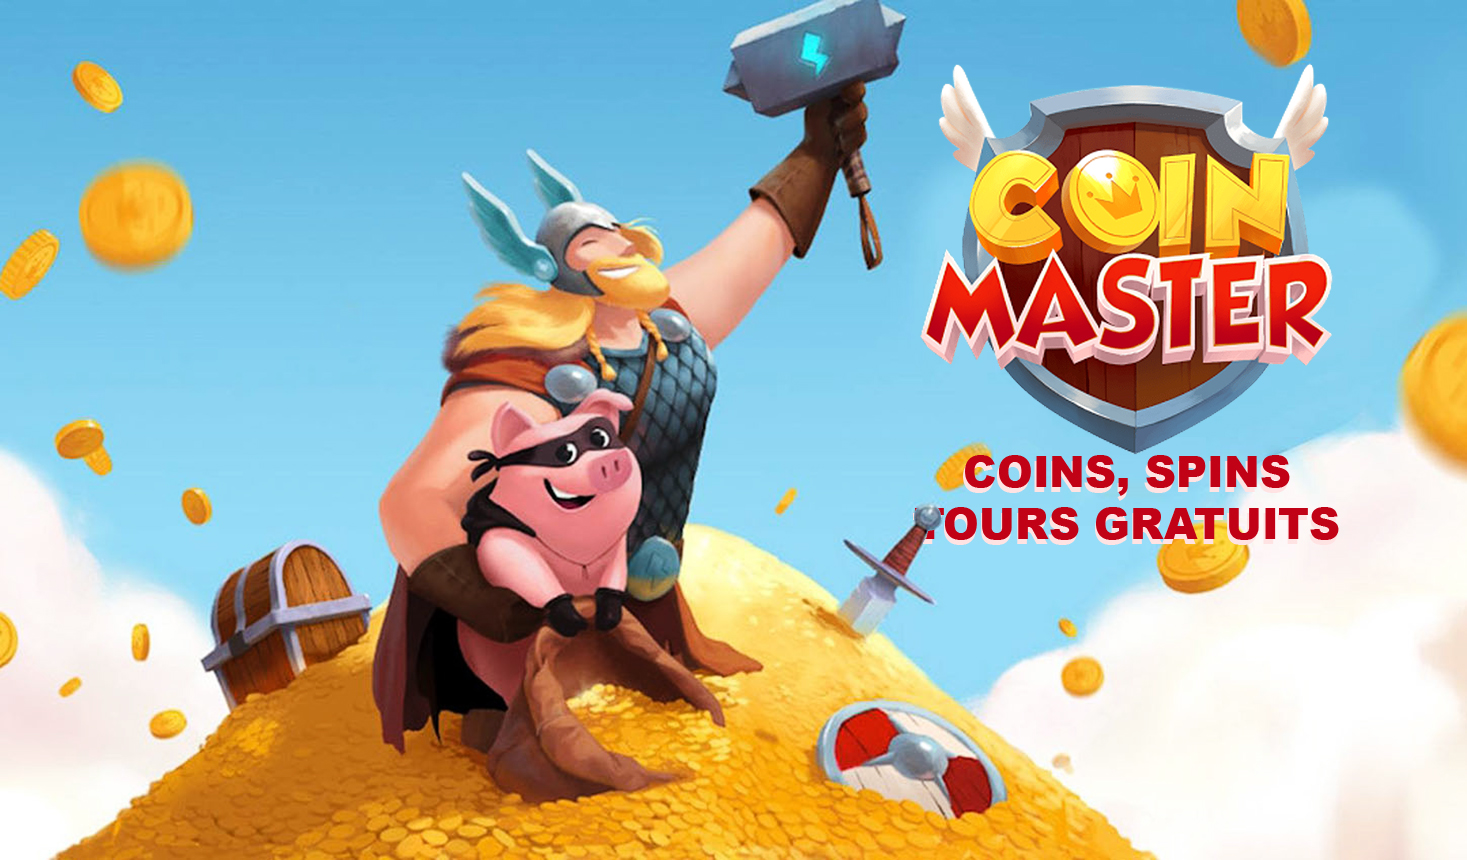 A Viking with a pig under his arm, looking for Coin Master free spins I assume